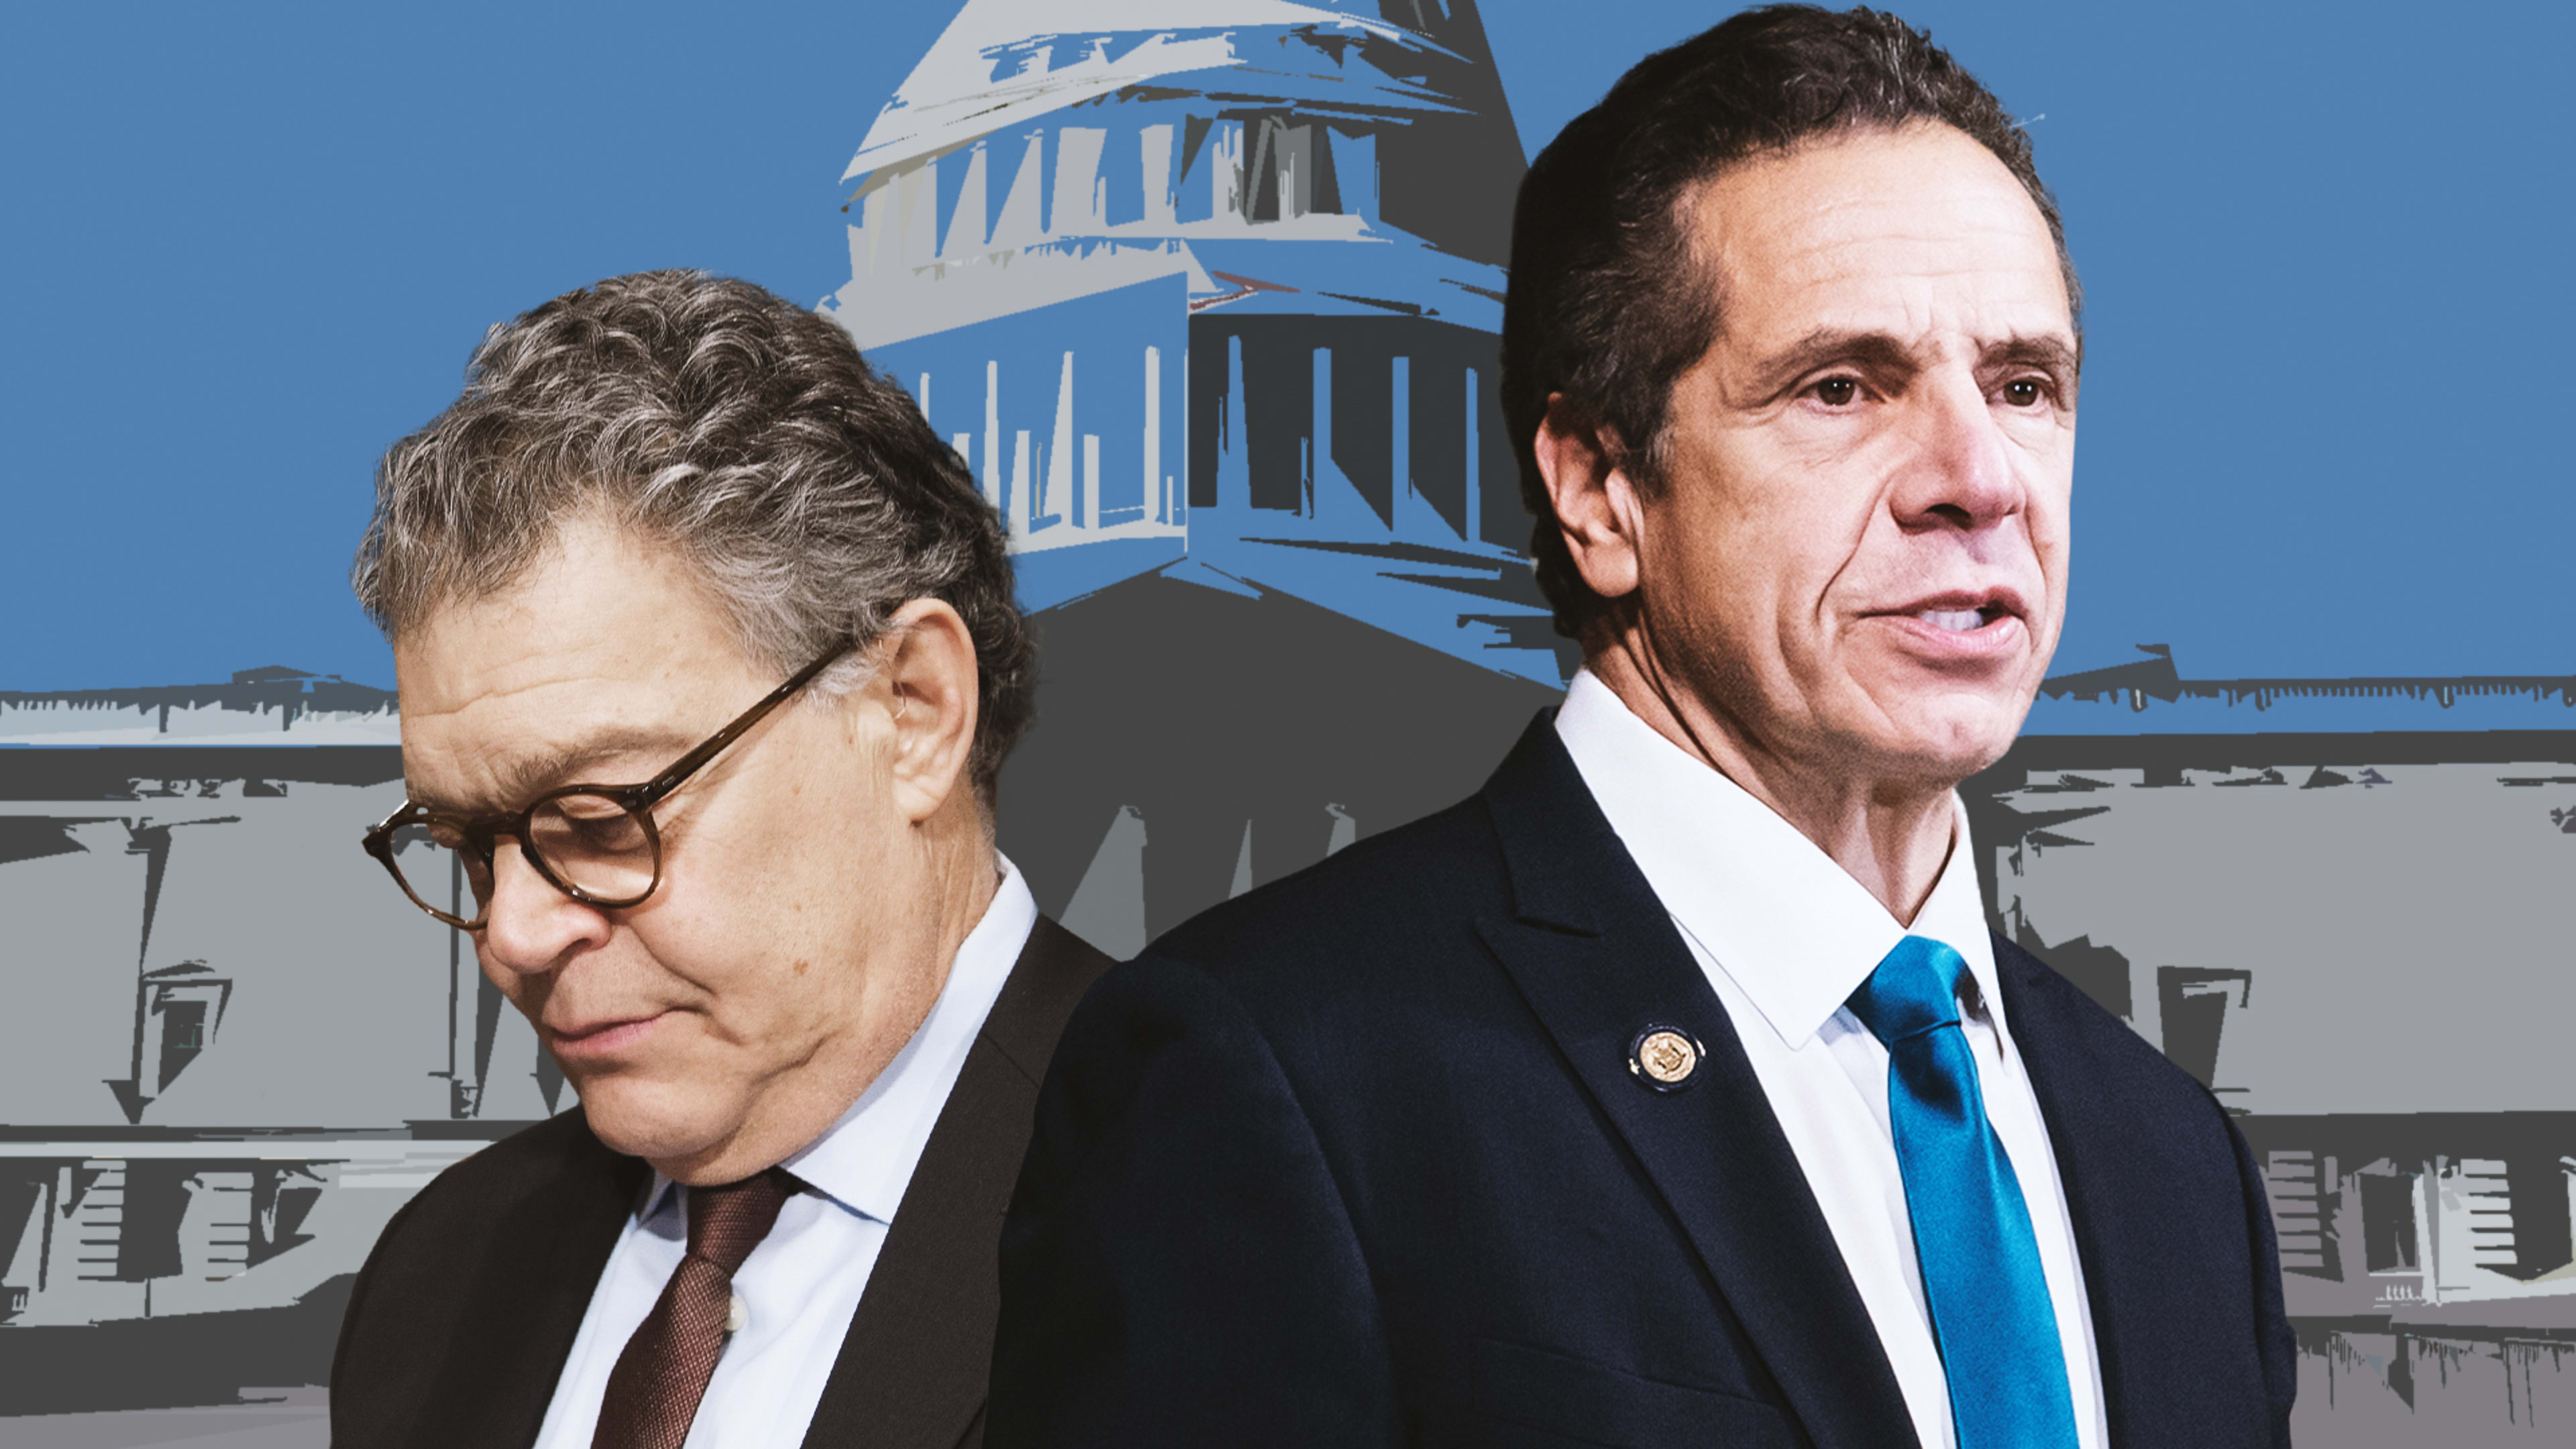 Morality doesn’t have a political affiliation: Holding Andrew Cuomo accountable